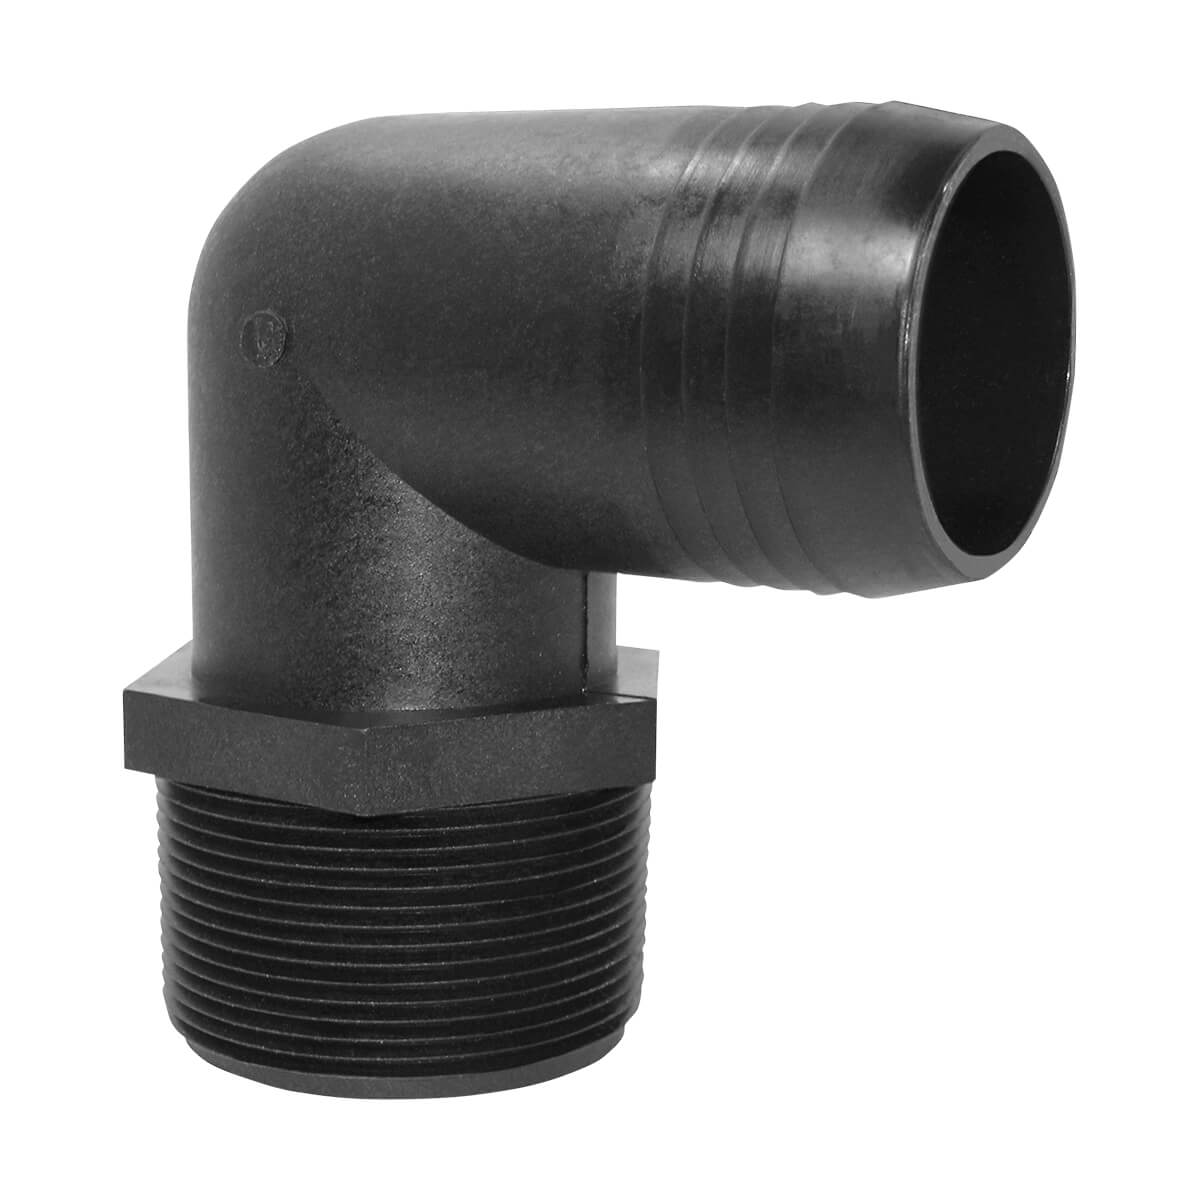 Elbow 3/4-in Male NPT x 3/8-in Hose Barb